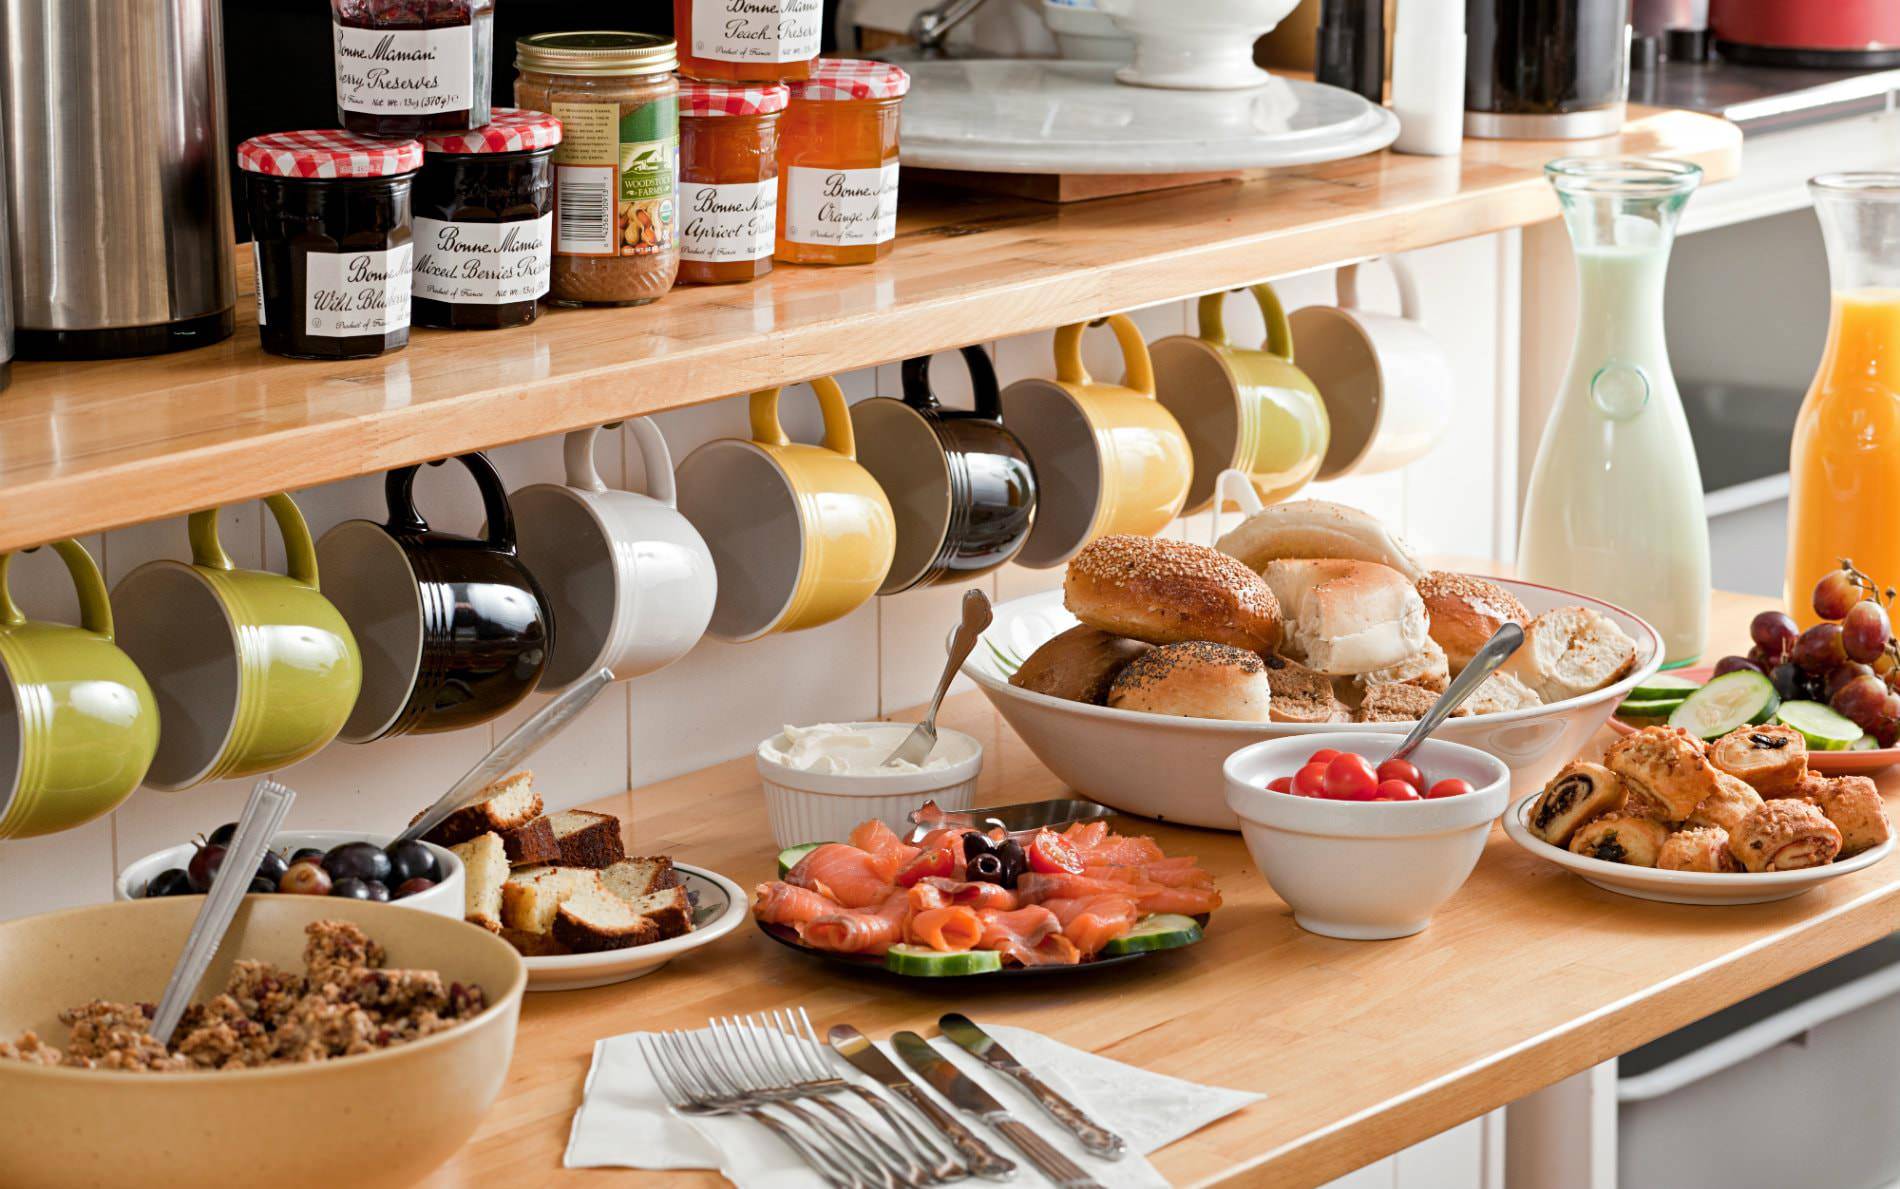 Butcher block counter topped with breakfast foods under a row of colorful mugs hanging from a wood shelf